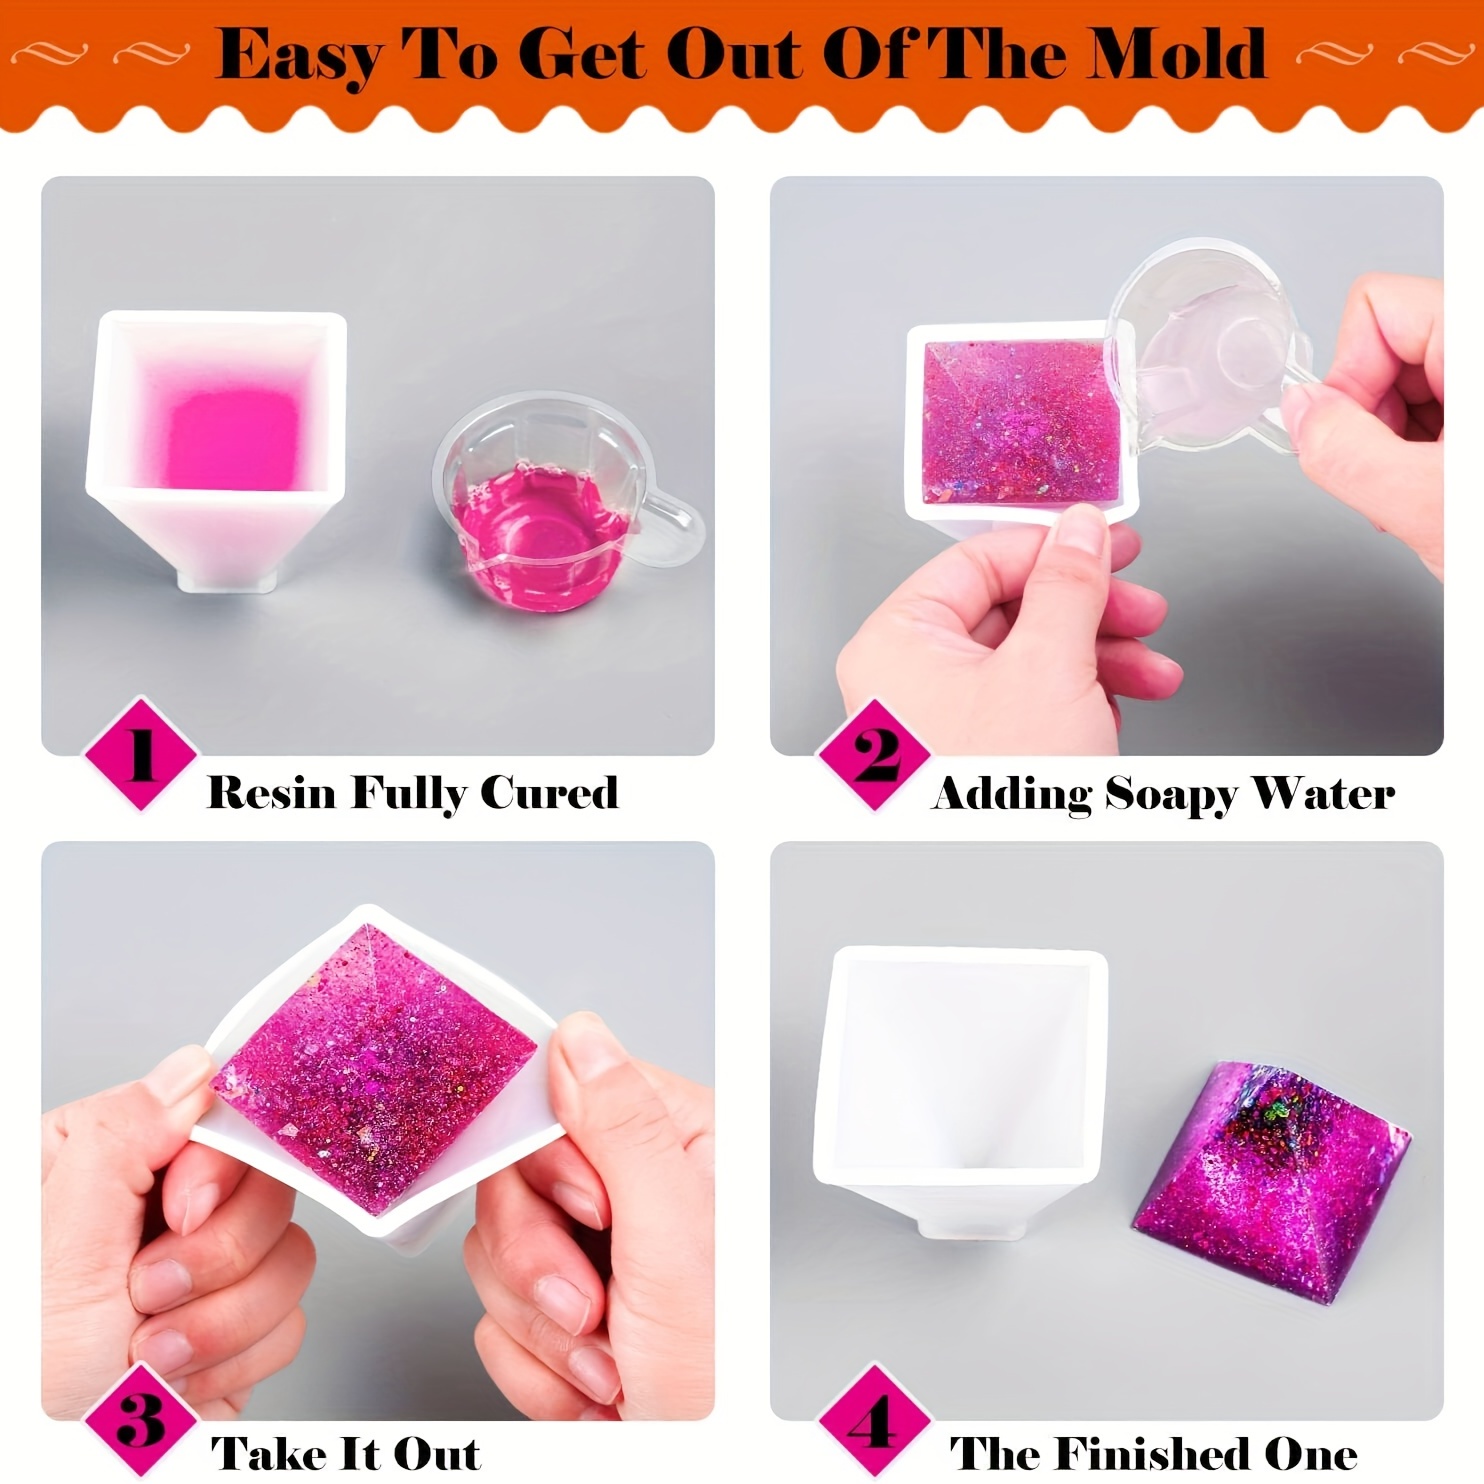 How To Make Silicone Molds For Resin Casting 